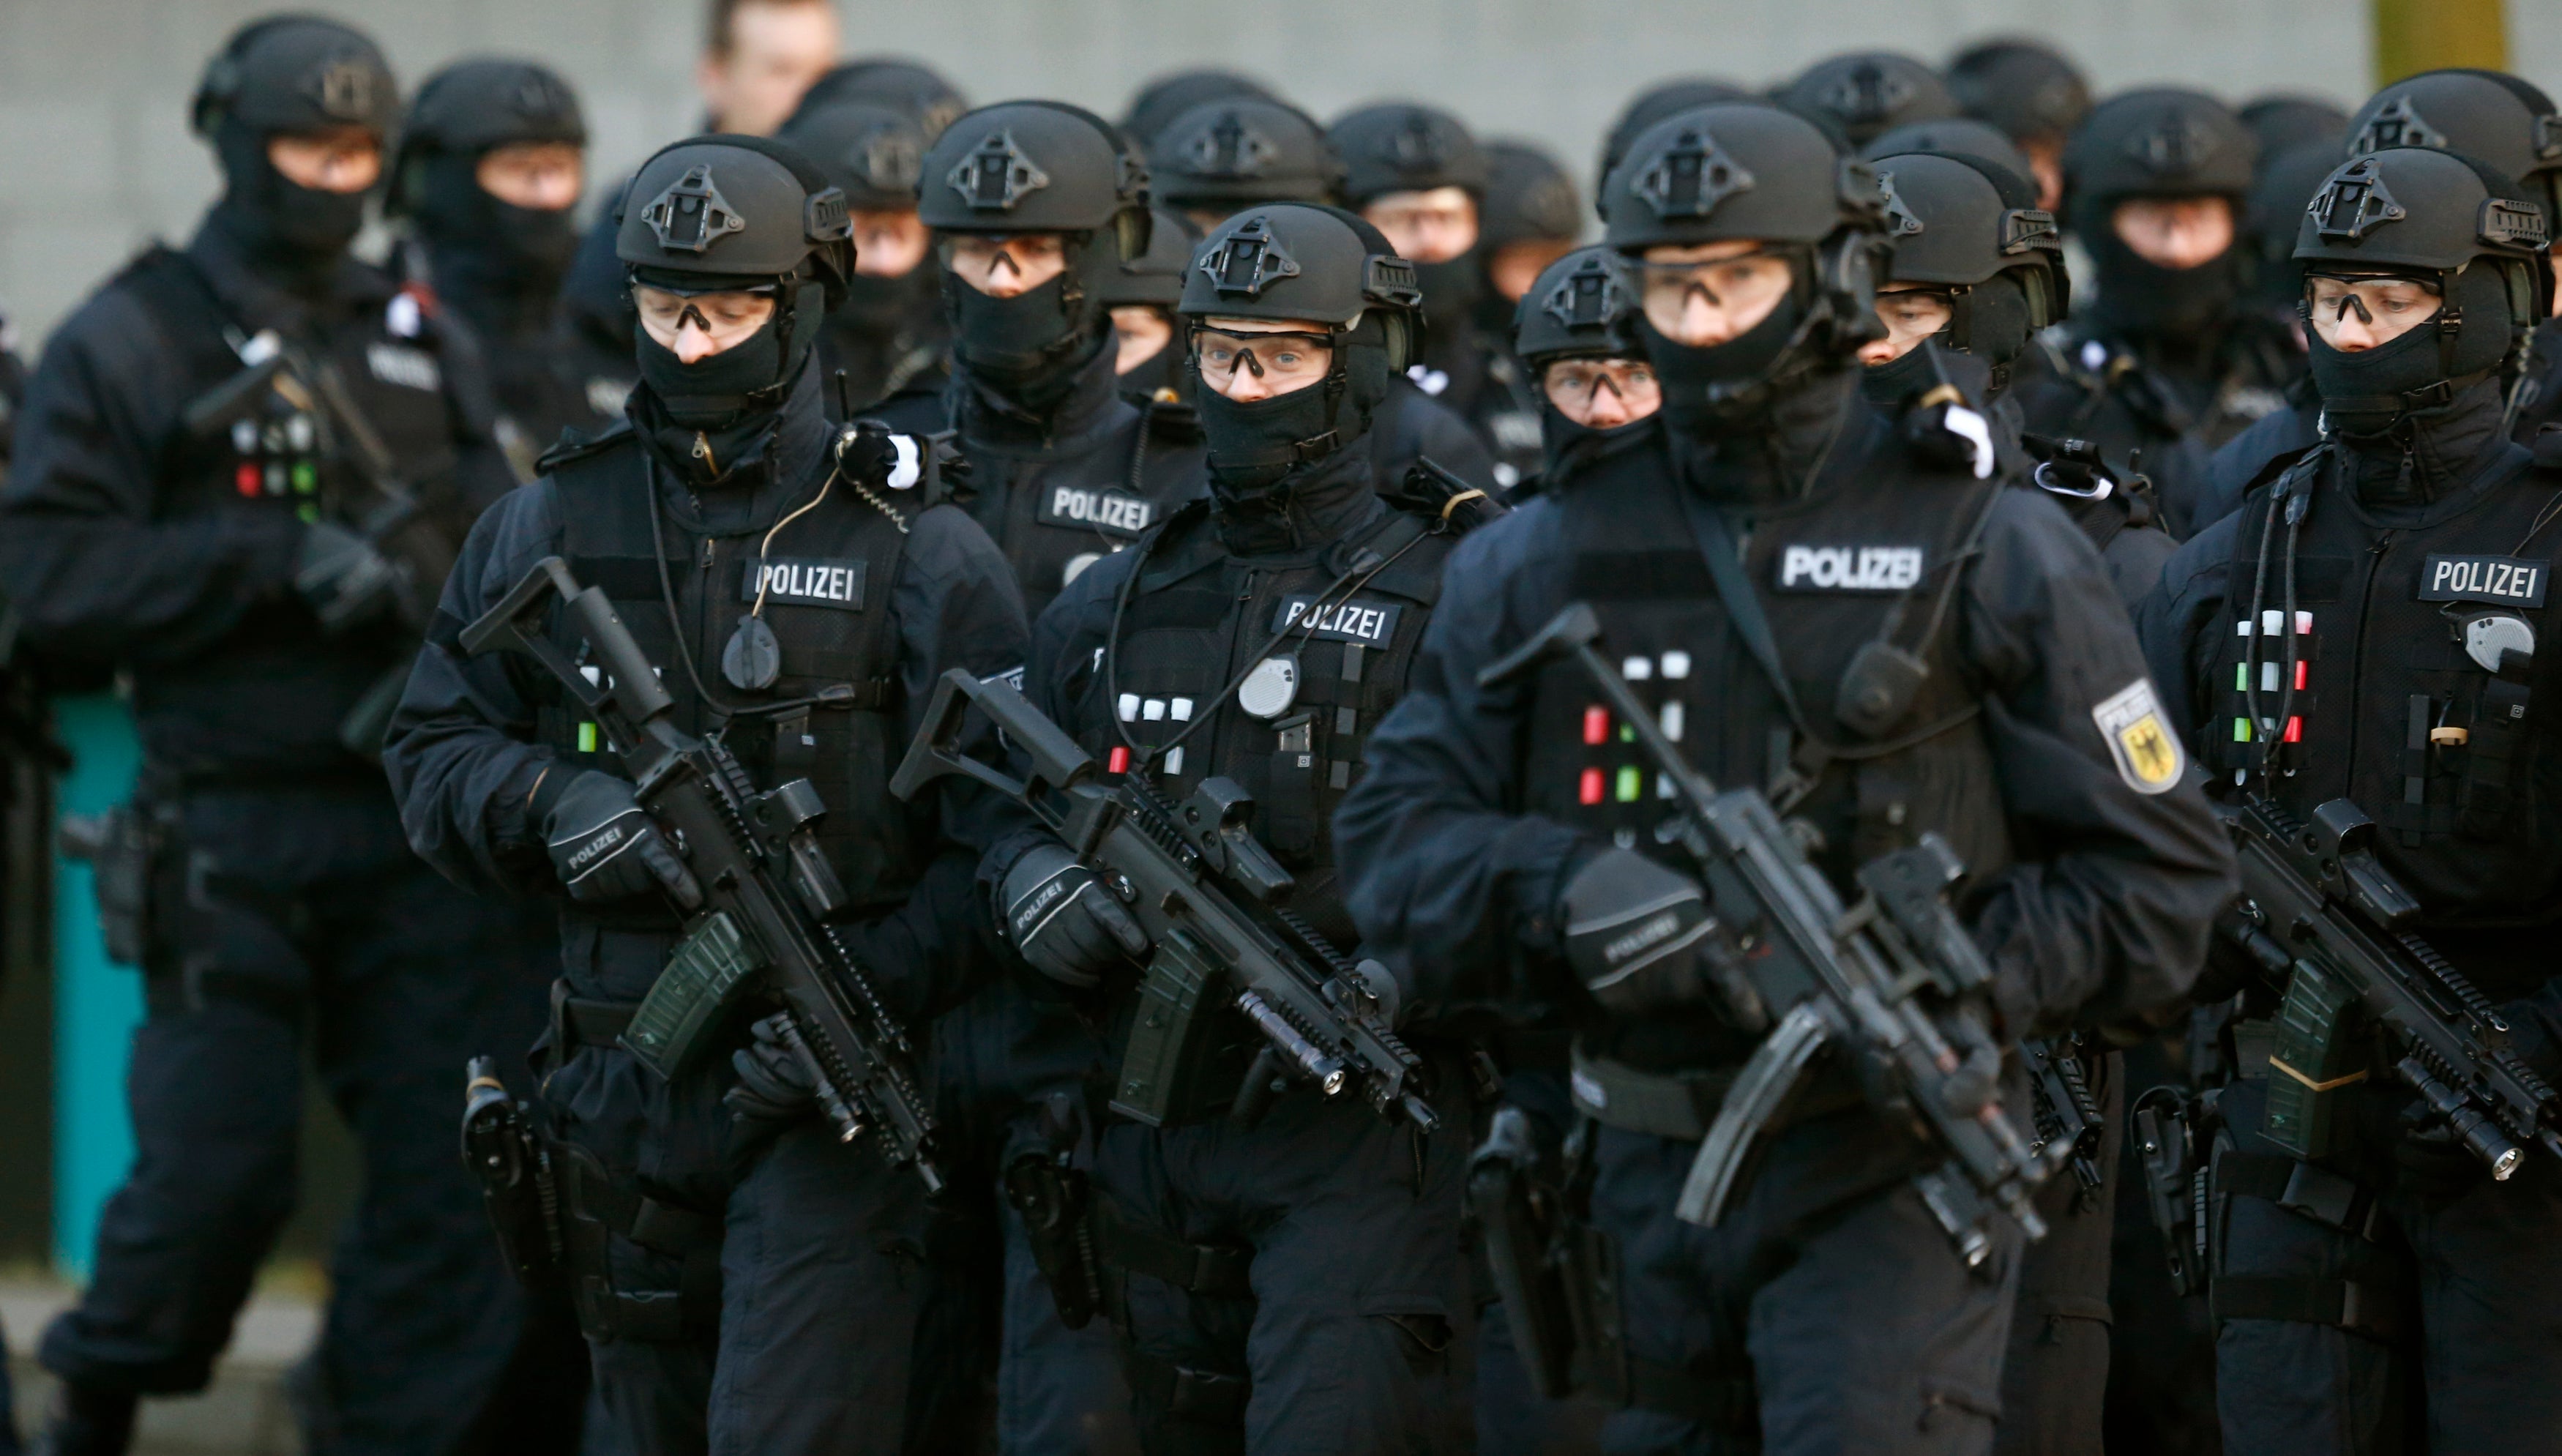 German federal police are seen during a presentation of the counterterrorism unit near Berlin, Dec. 16, 2015